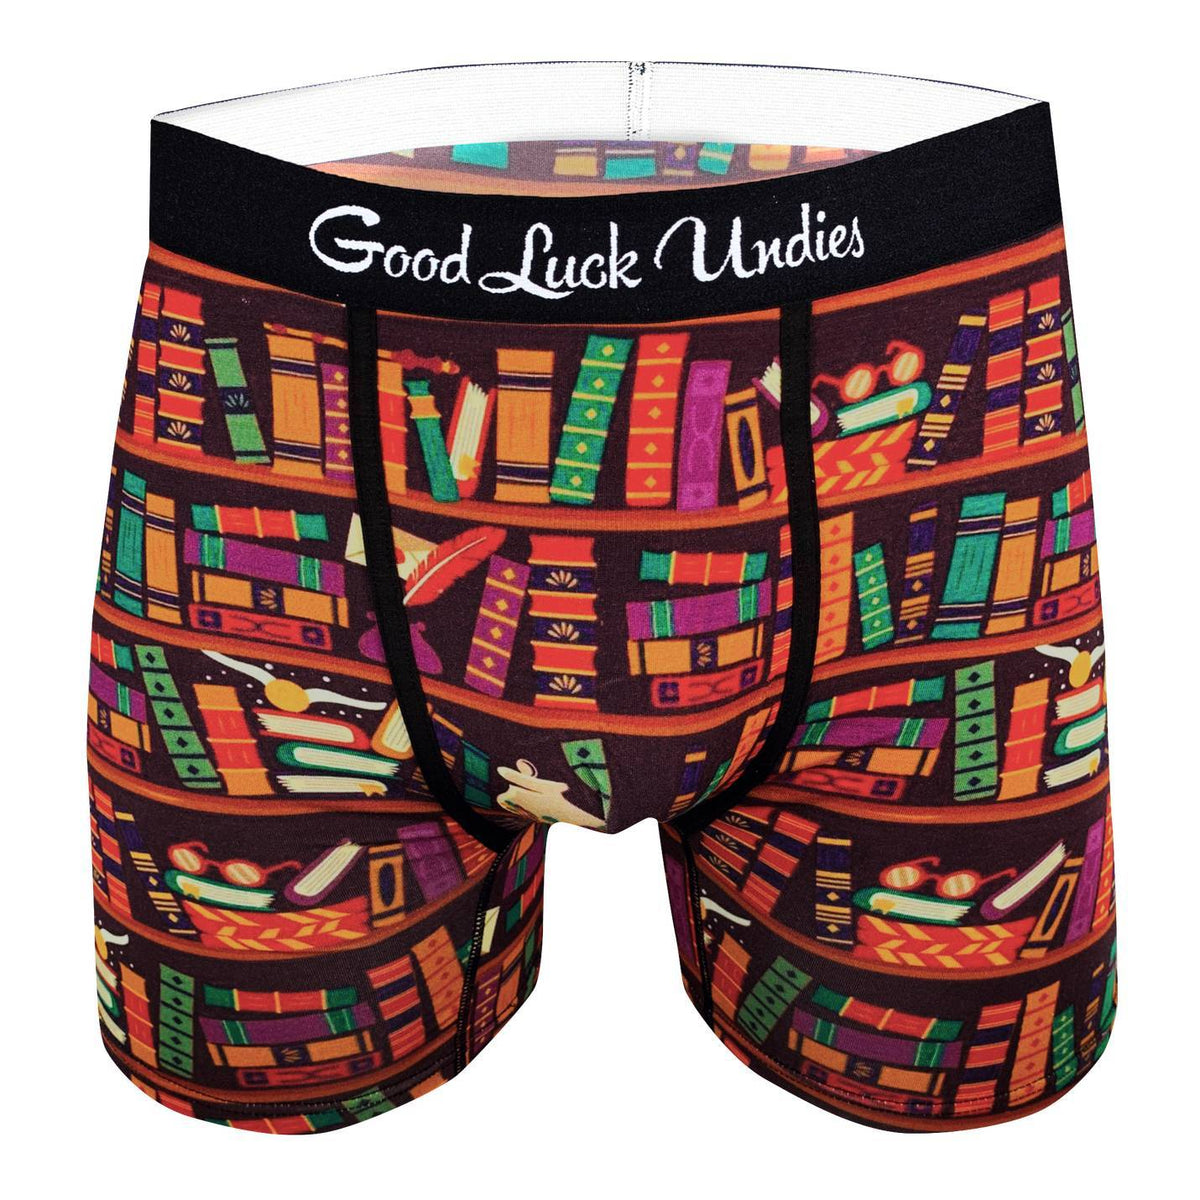 Property of my girlfriend - shop online for men funny underwear with print